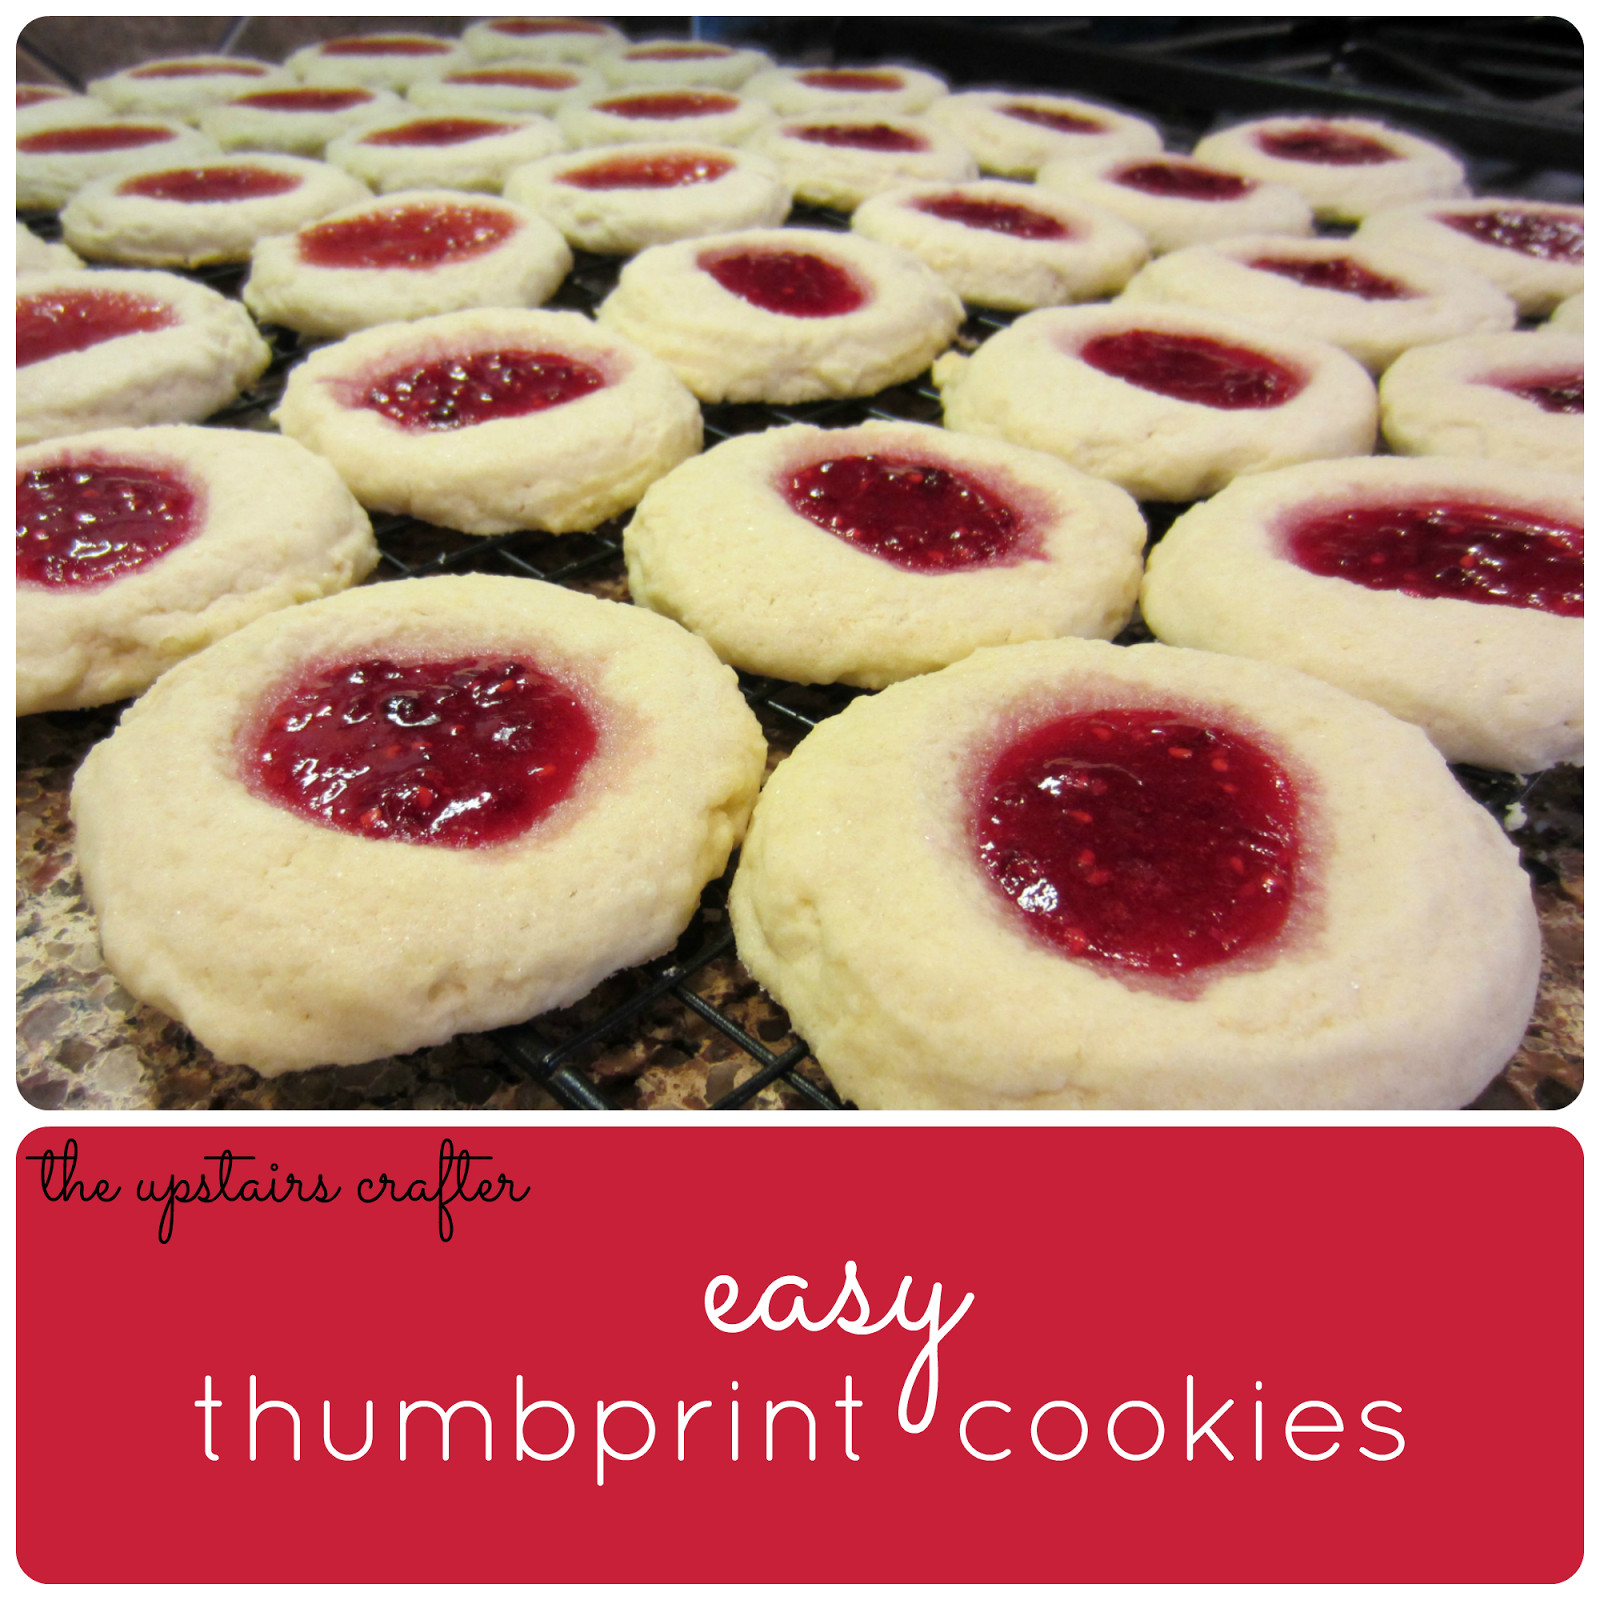 Thumbprint Cookies Recipe
 The Upstairs Crafter Easy Thumbprint Cookies